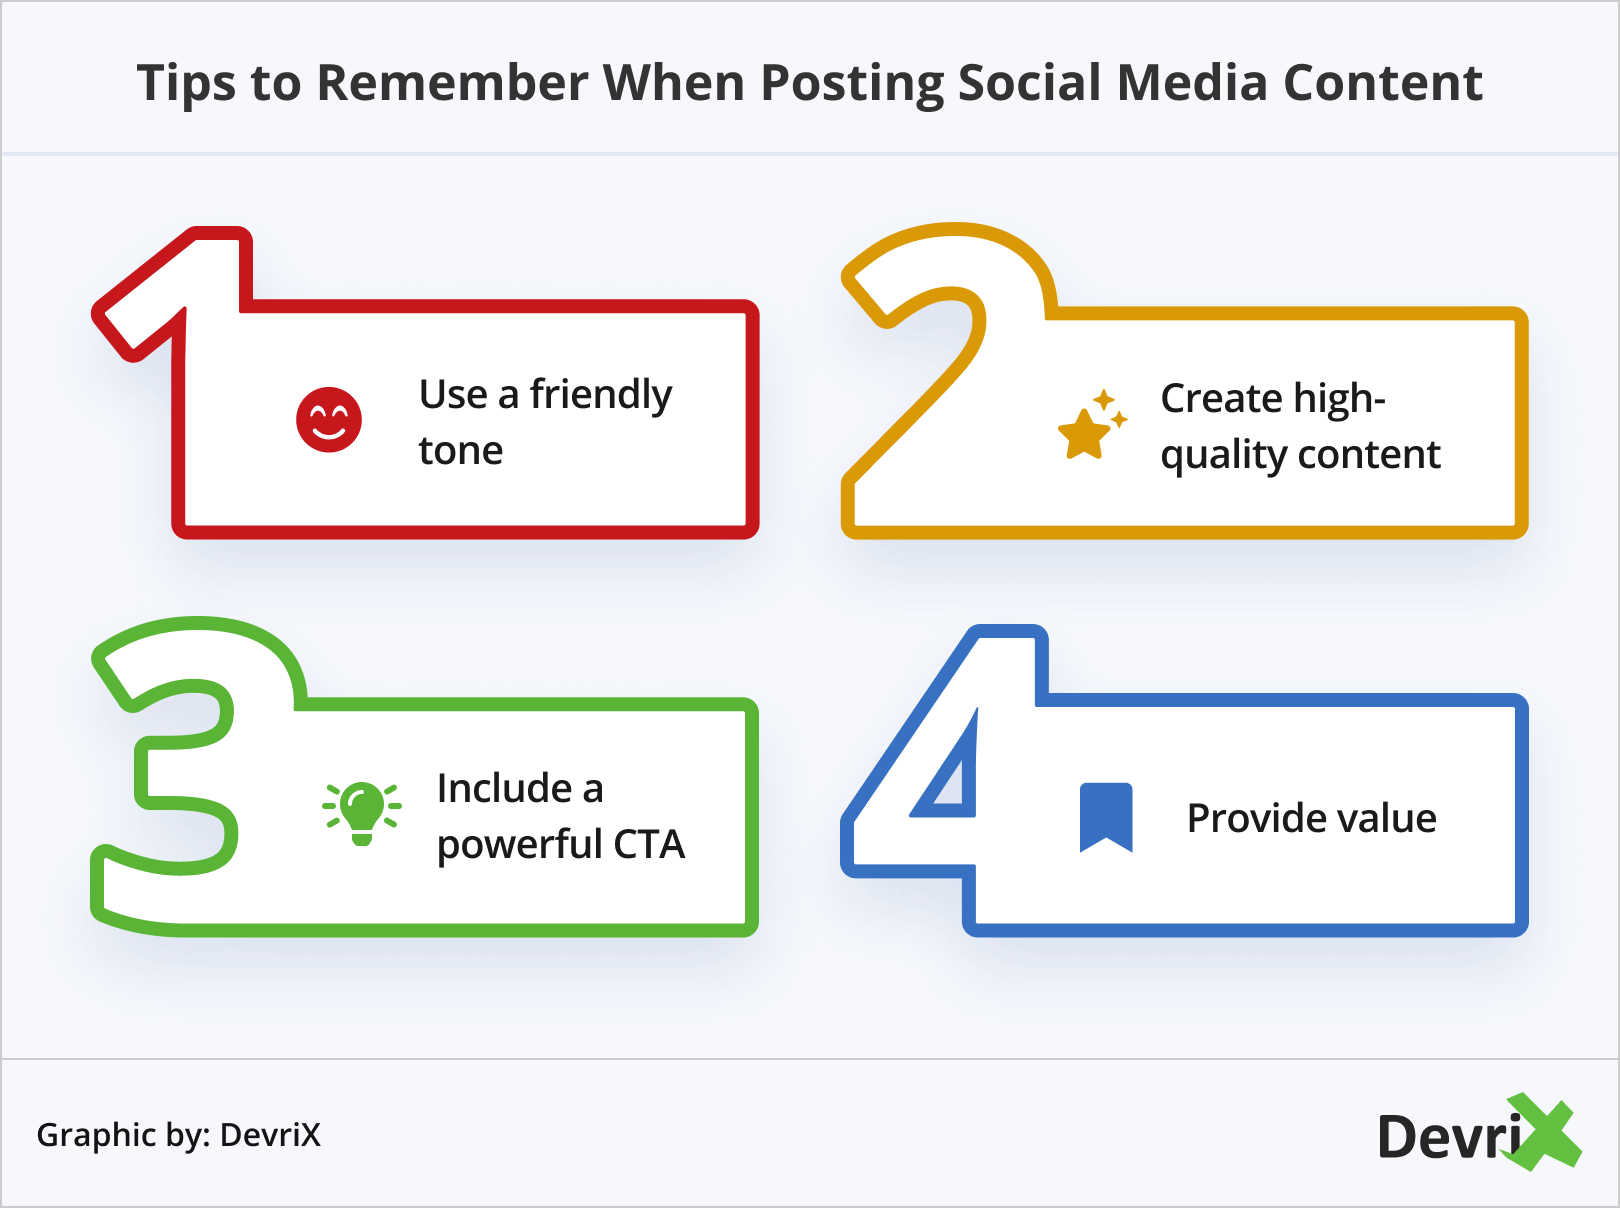 Tips to Remember When Posting Social Media Content